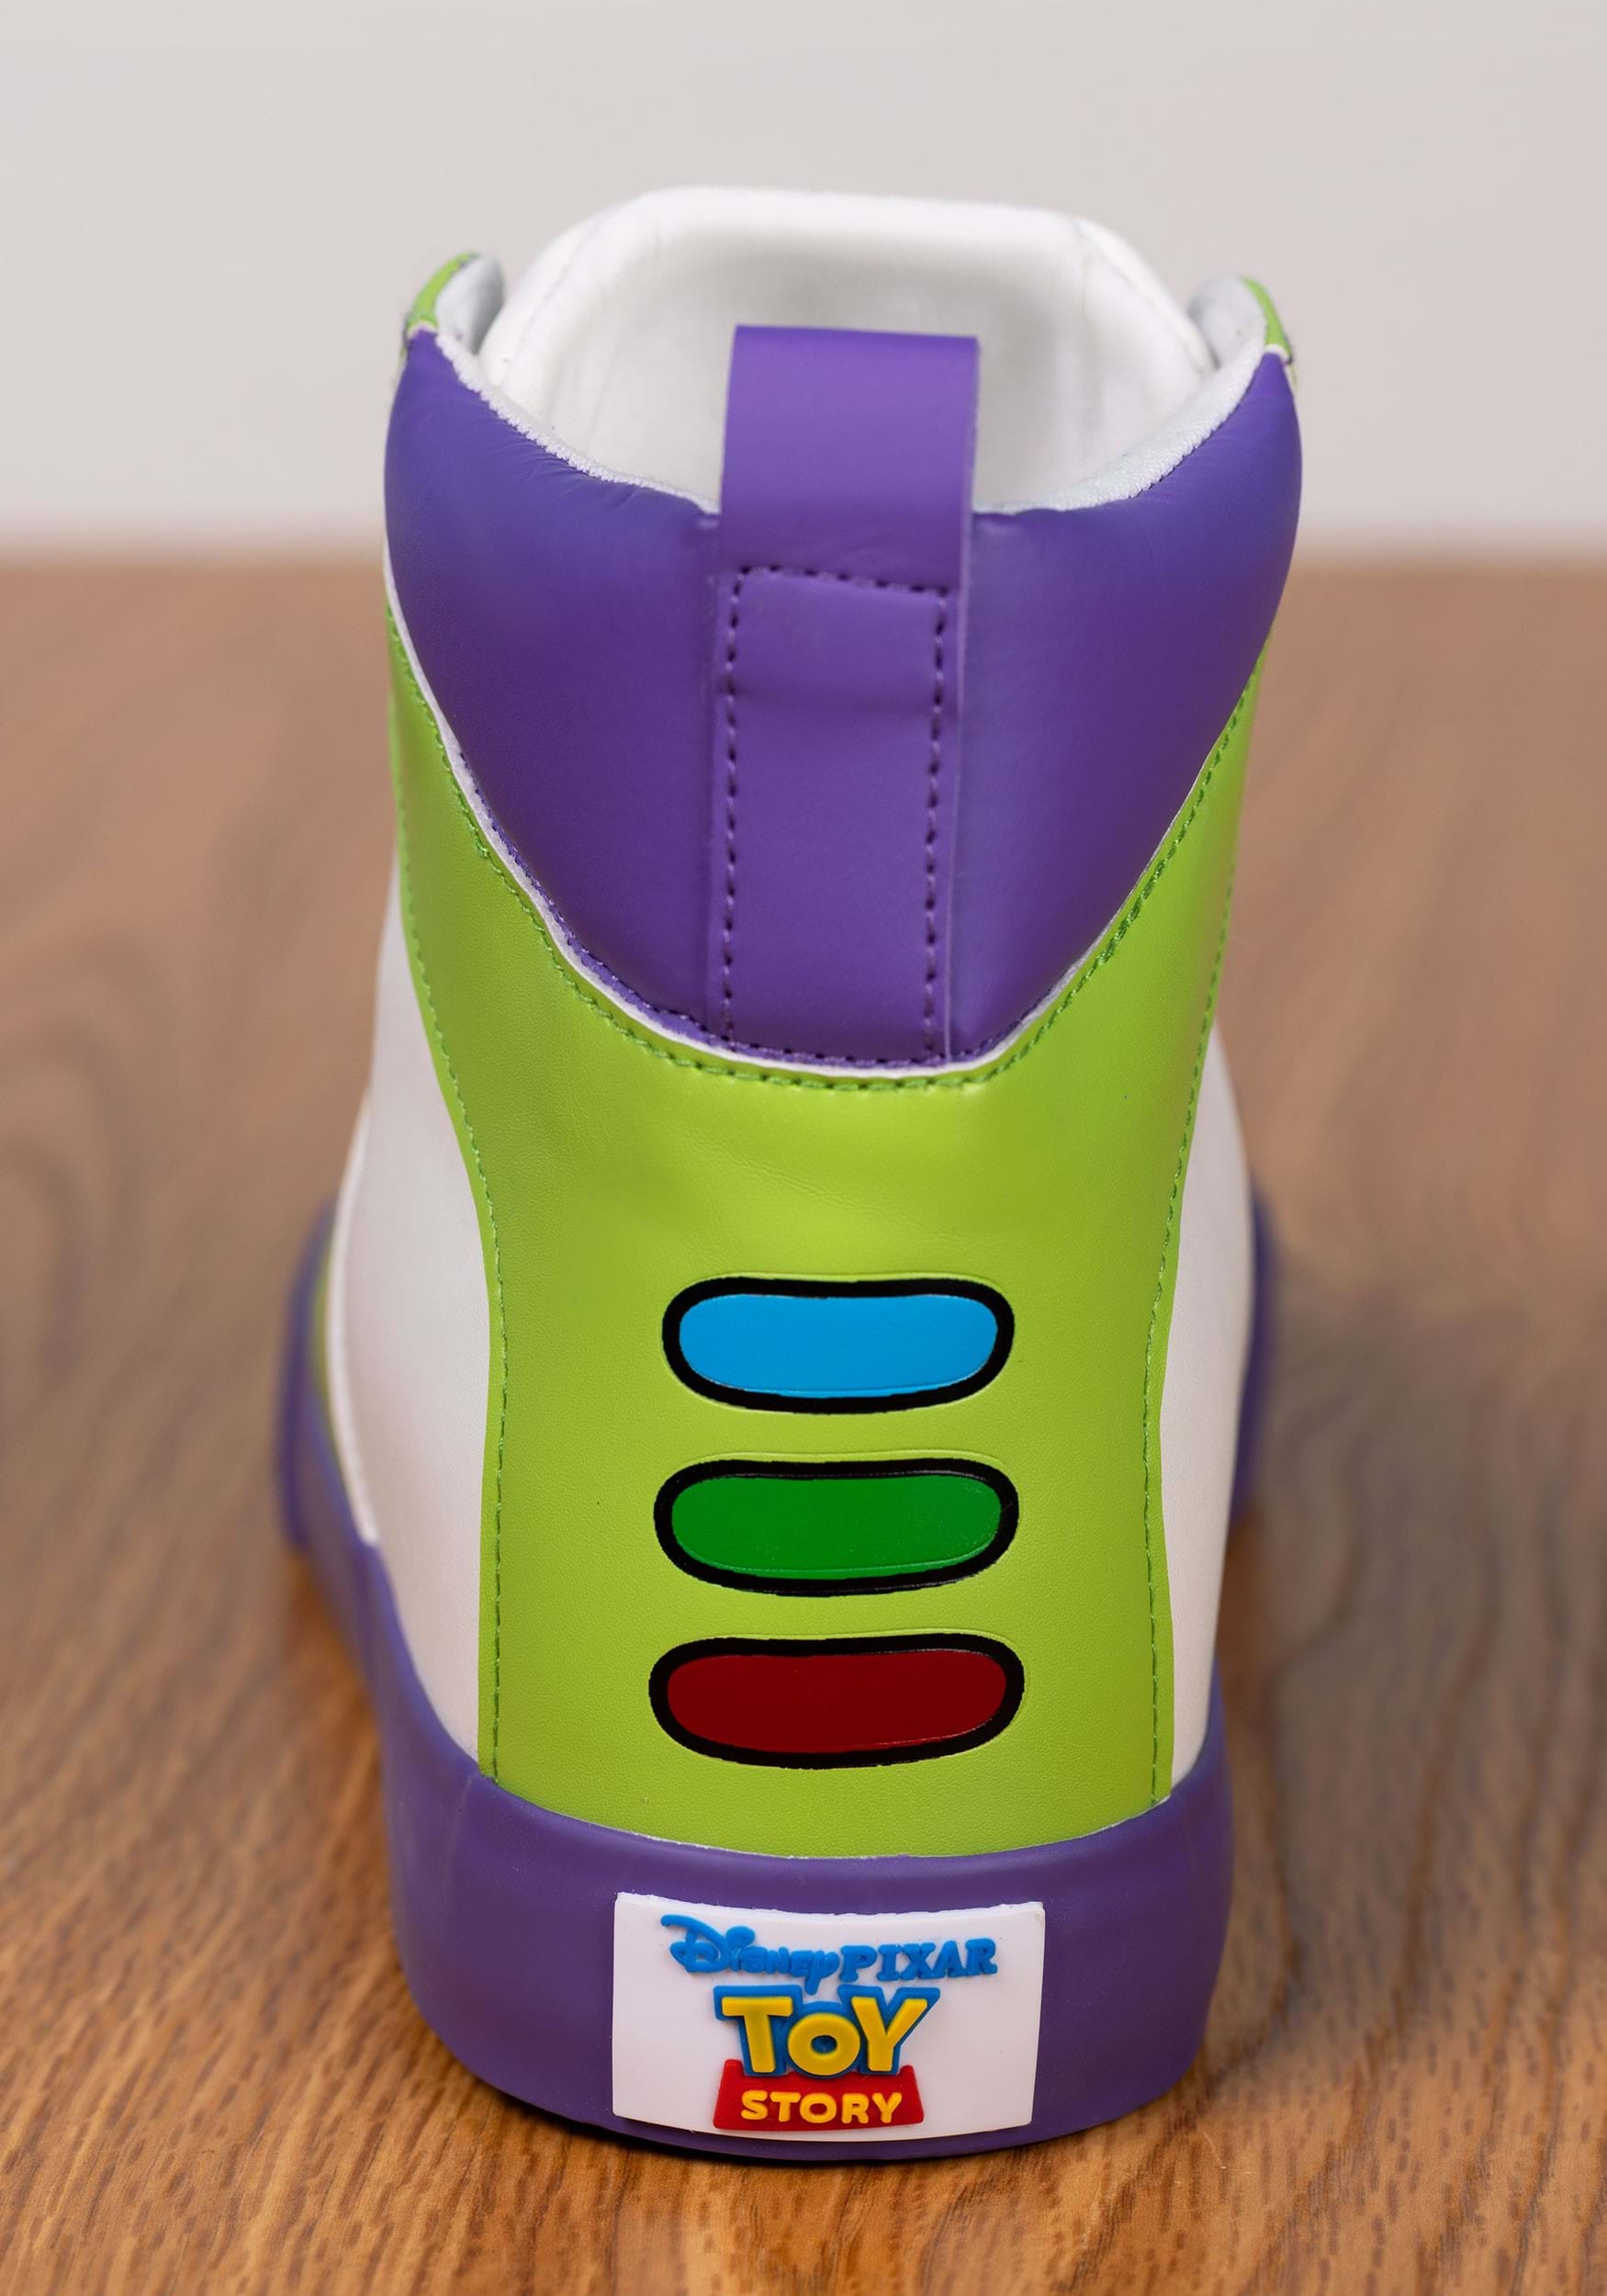 Buzz Lightyear Kid's High Top Shoes